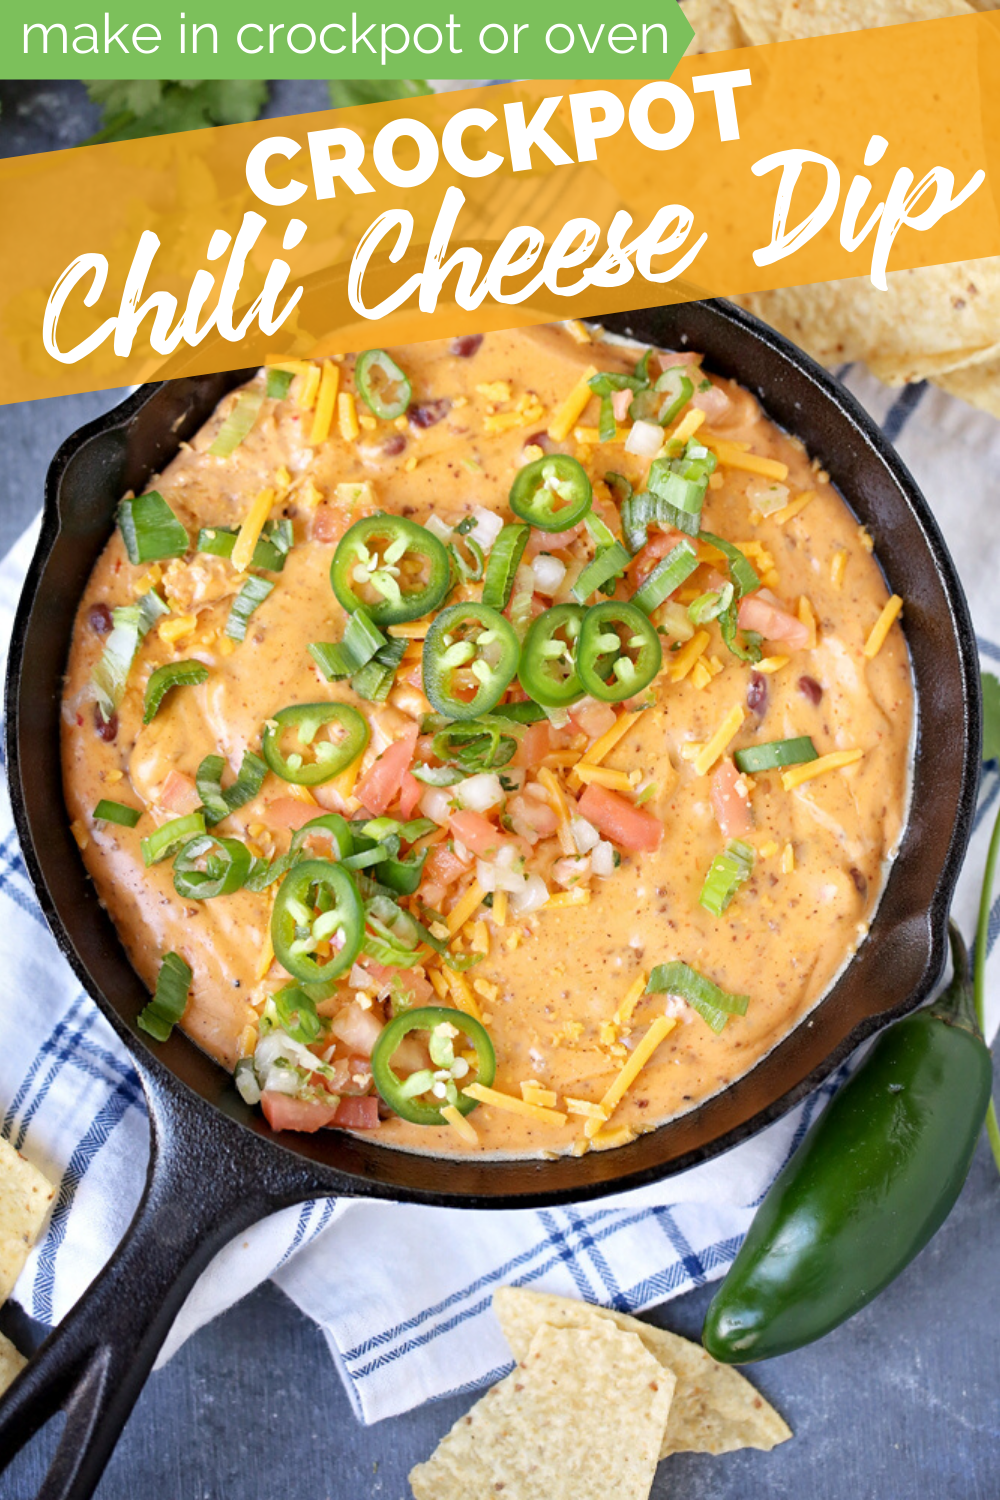 Oven or Crockpot Chili Cheese Dip recipe from The Rockstar Mommy